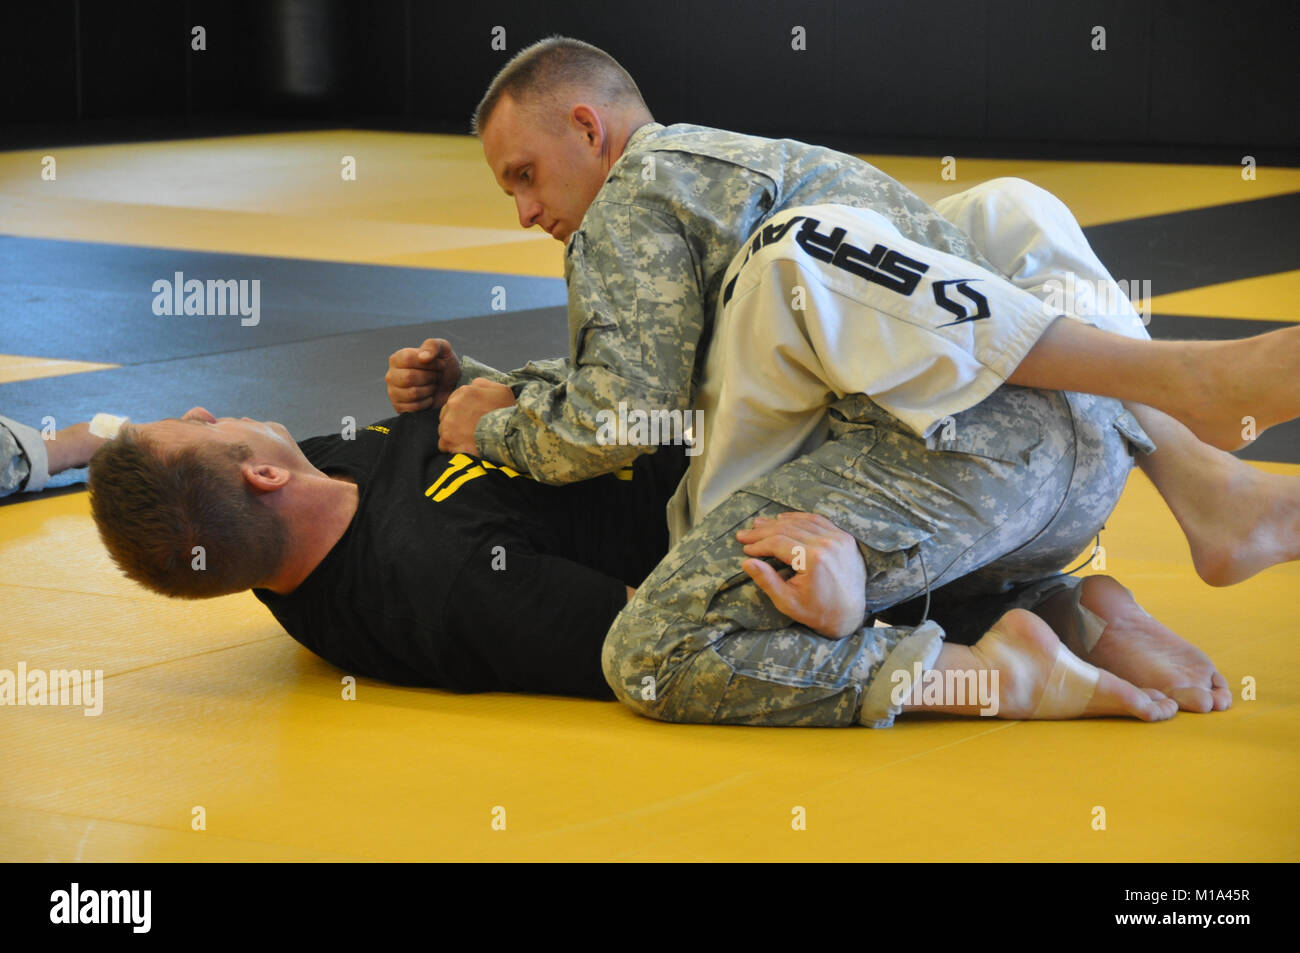 110914-Z-DH635-011 Sgt. Ryan Williams of Yucaipa, Calif., a military police officer with the 40th Military Police Company, 185th Military Police Battalion, 49th Military Police Brigade, practices combatives prior to the end of week double elimination tournament held as part of the Best Warrior Competition at Camp San Luis Obispo, Calif., Sept. 14, 2011. (Army National Guard photo/ Sgt. Salli Curchin) Stock Photo